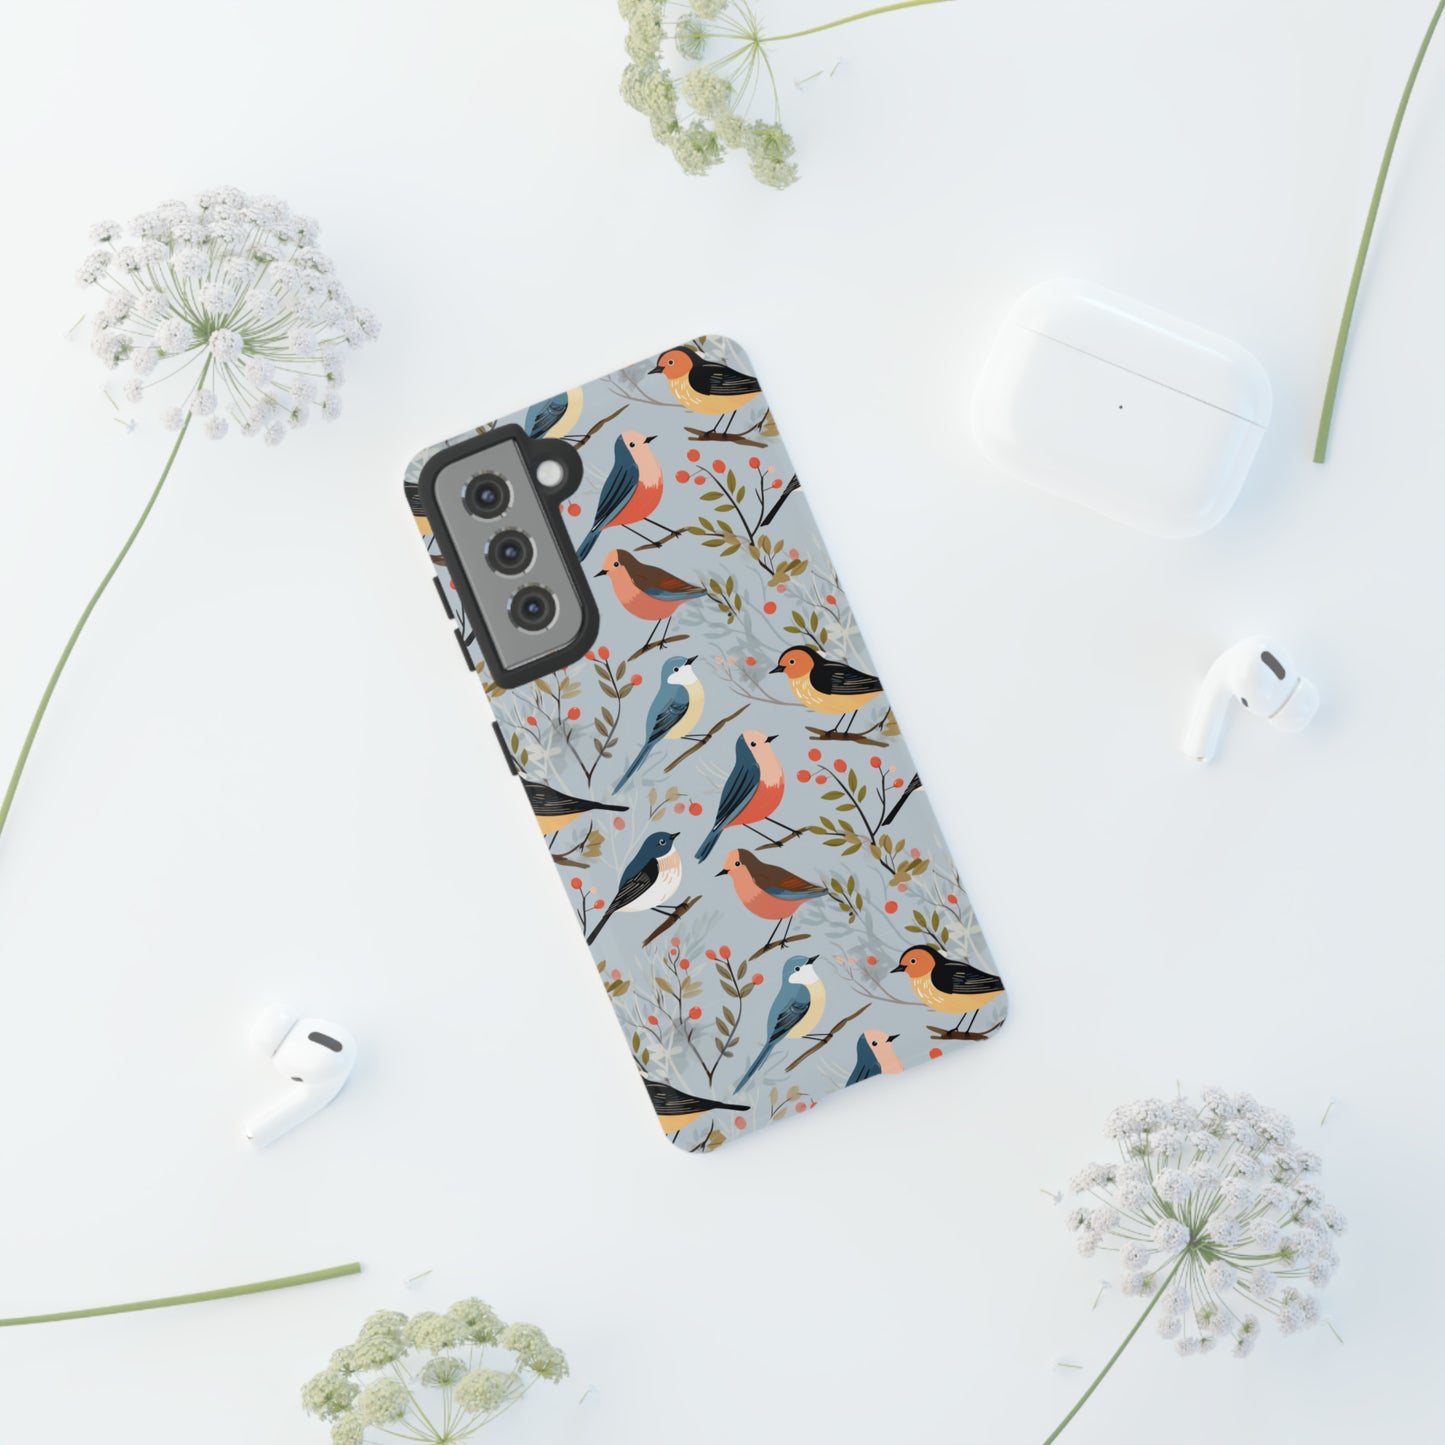 Song Bird Phone Case - Protective Cover for iPhone, Samsung Galaxy, Google Pixel - Glossy/Matte Finish - Tough Cases - Bird Lover Gift